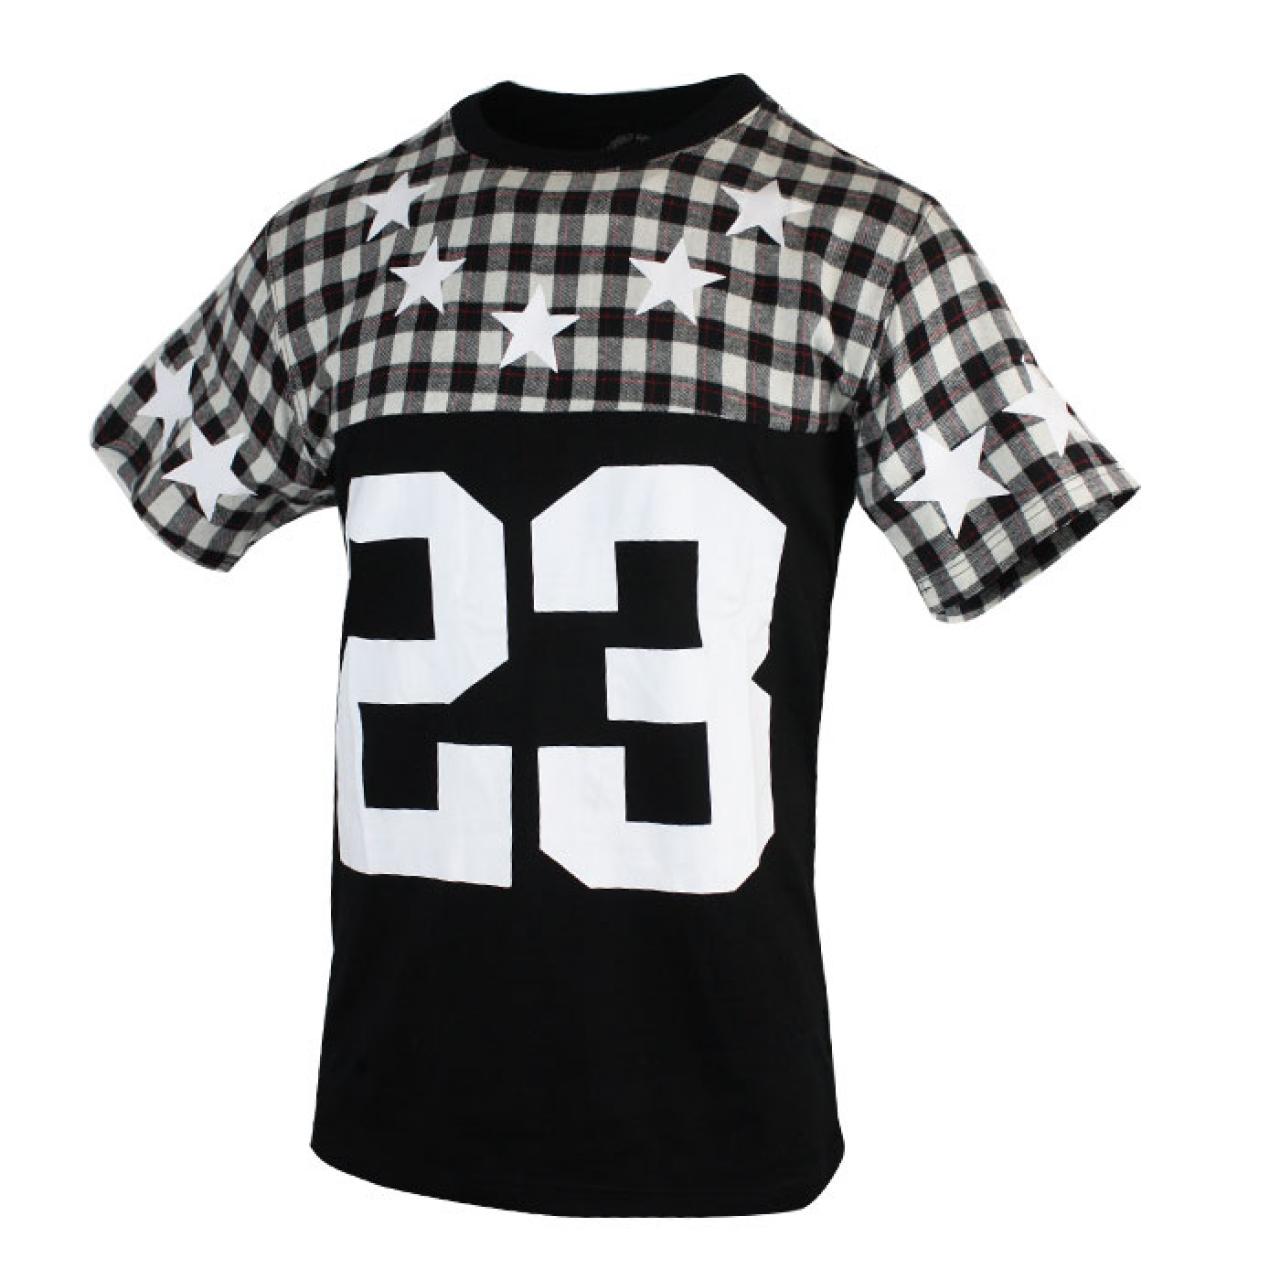 Player Design Mens Black Tee Shirt With Checkerboard Background